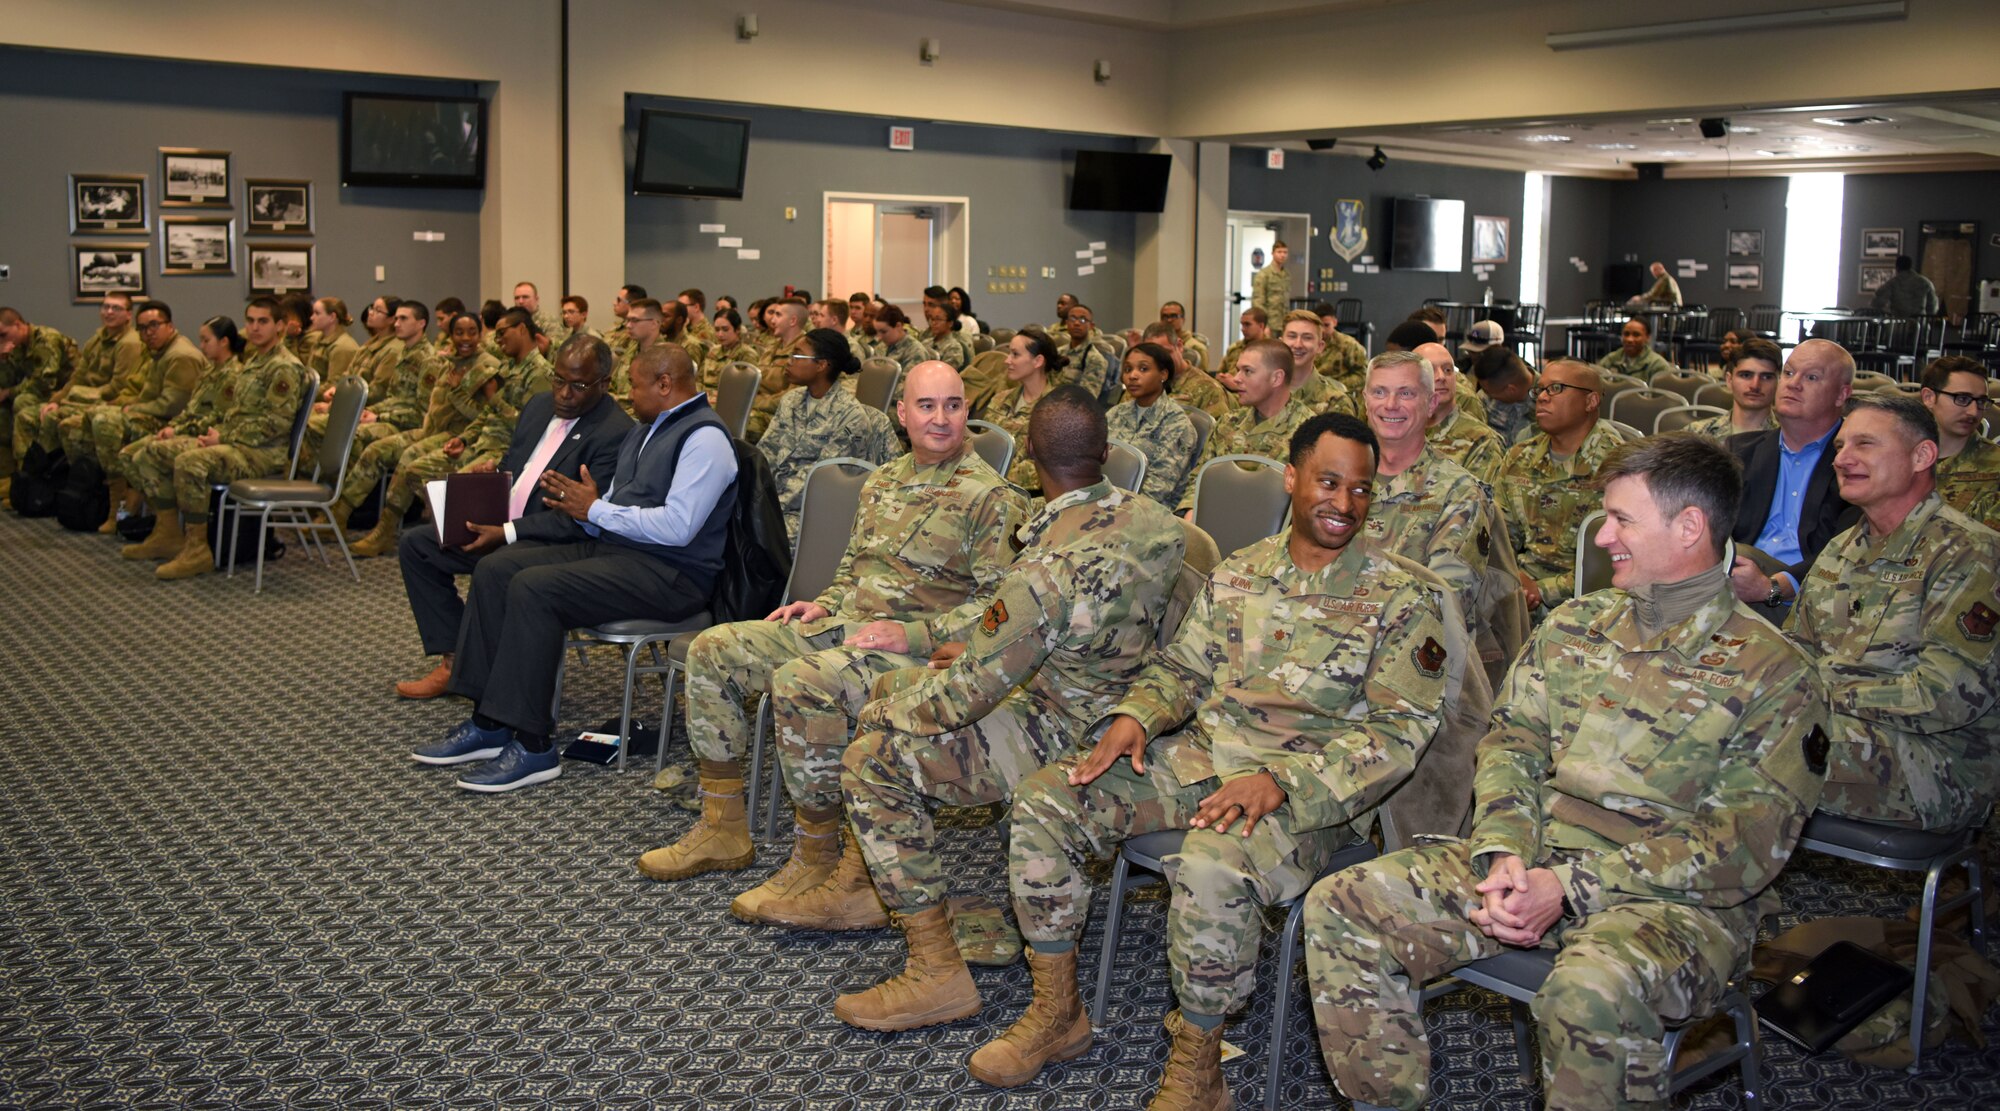 Members of Goodfellow attended the Black History Month event to celebrate history and heritage at the event center on Goodfellow Air Force Base, Texas, February 20, 2020. During the event, members of team Goodfellow came together to recognize the accomplishments of African American and black individuals highlighting military contributions. (U.S. Air Force photo by Airman 1st Class Ethan Sherwood)